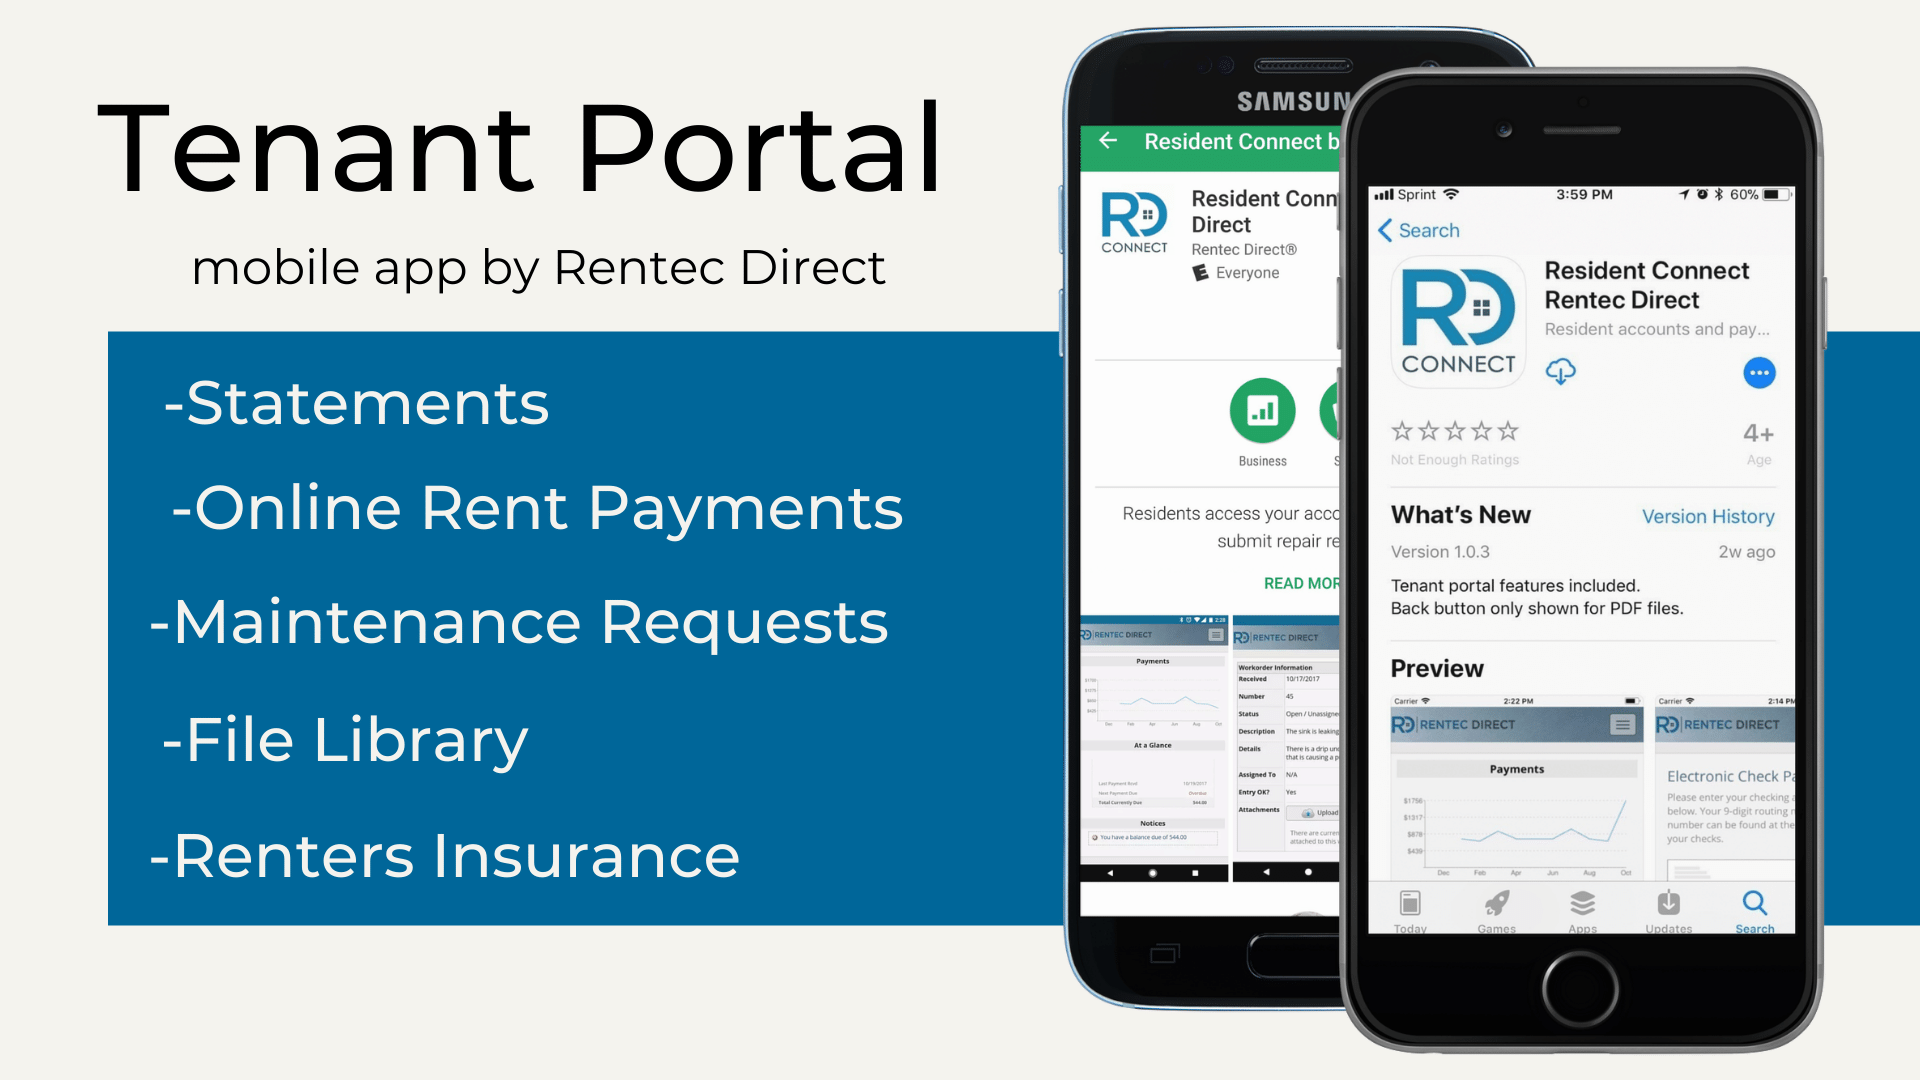 Rentec Direct Software - Tenants can easily set up online payments in the mobile friendly Tenant Portal via eCheck and credit/debit card. Renters have the options to schedule one-time rent payments or recurring monthly payments.